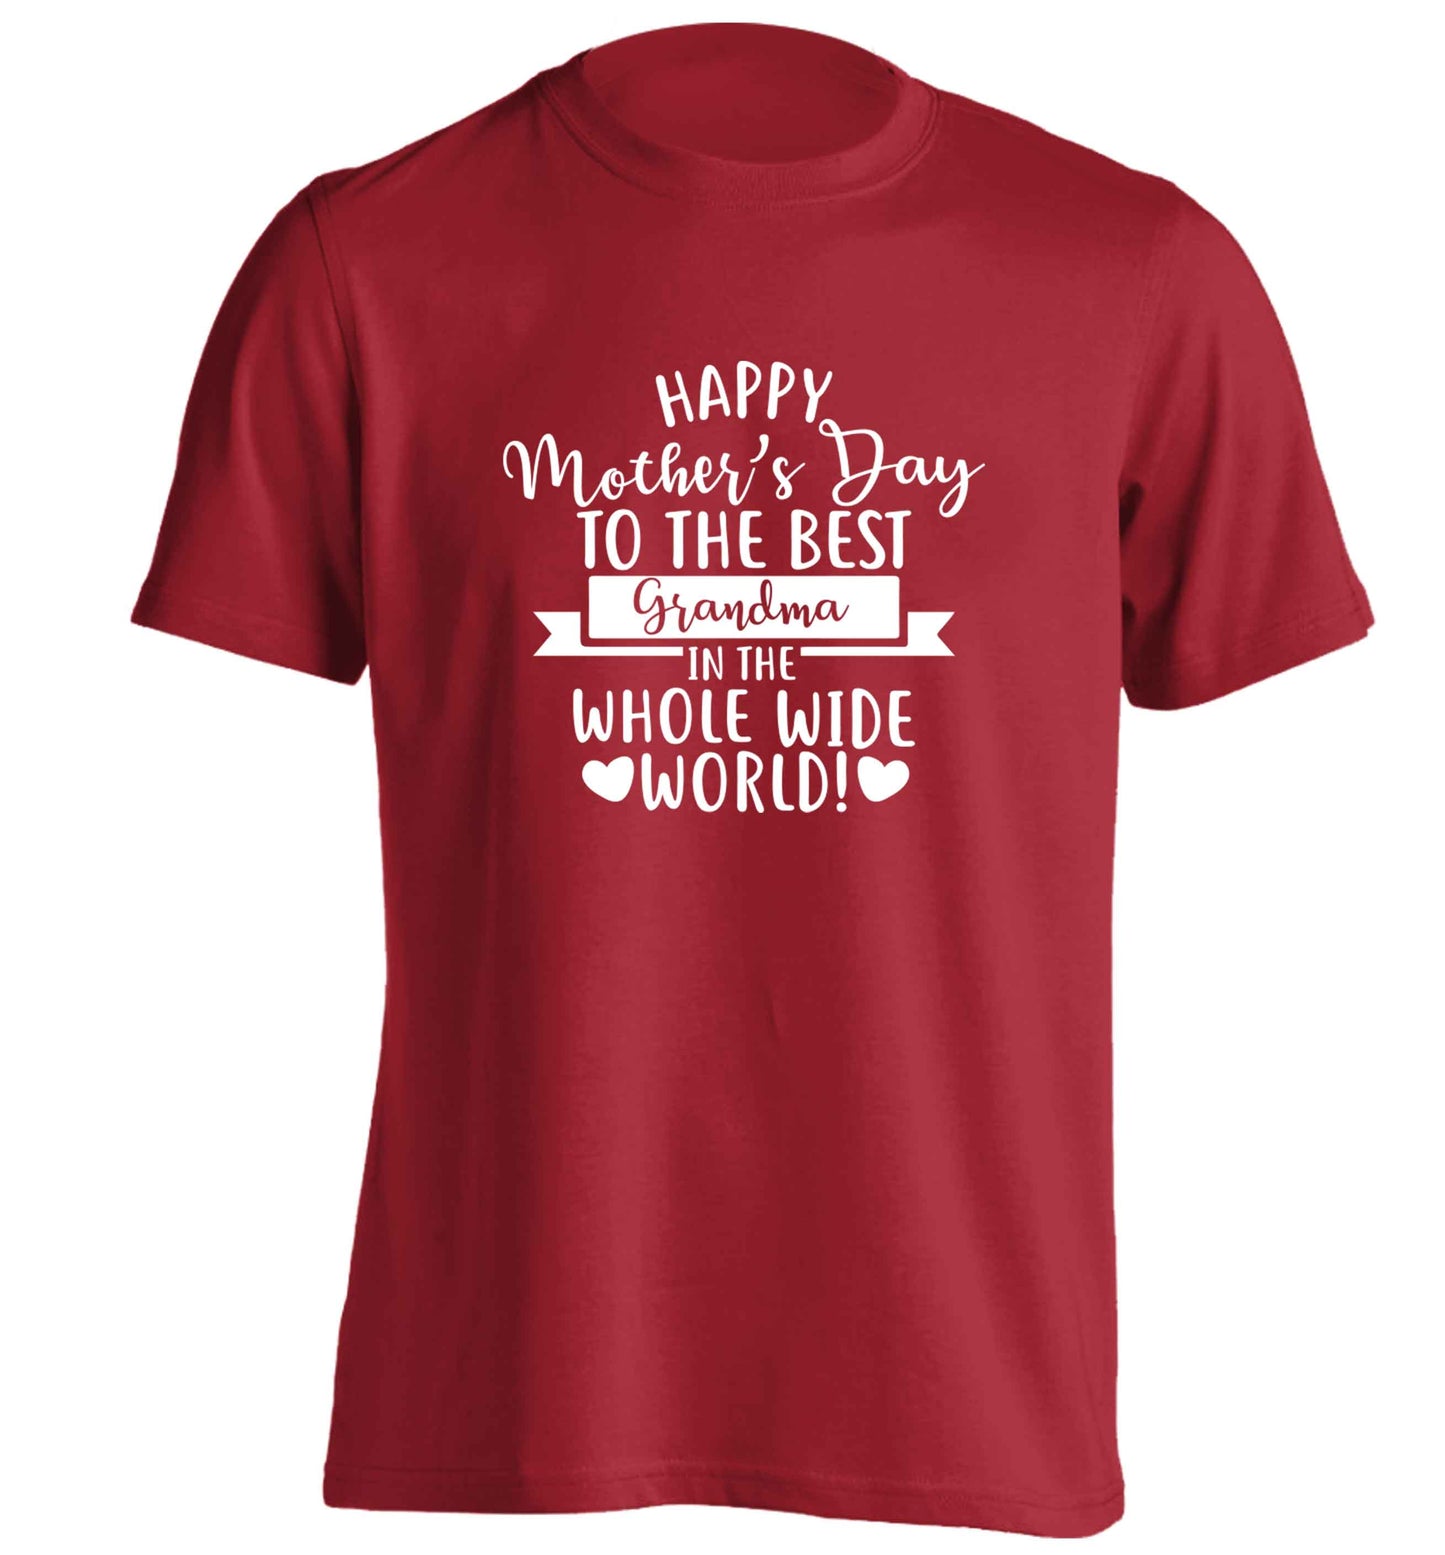 Happy mother's day to the best grandma in the world adults unisex red Tshirt 2XL